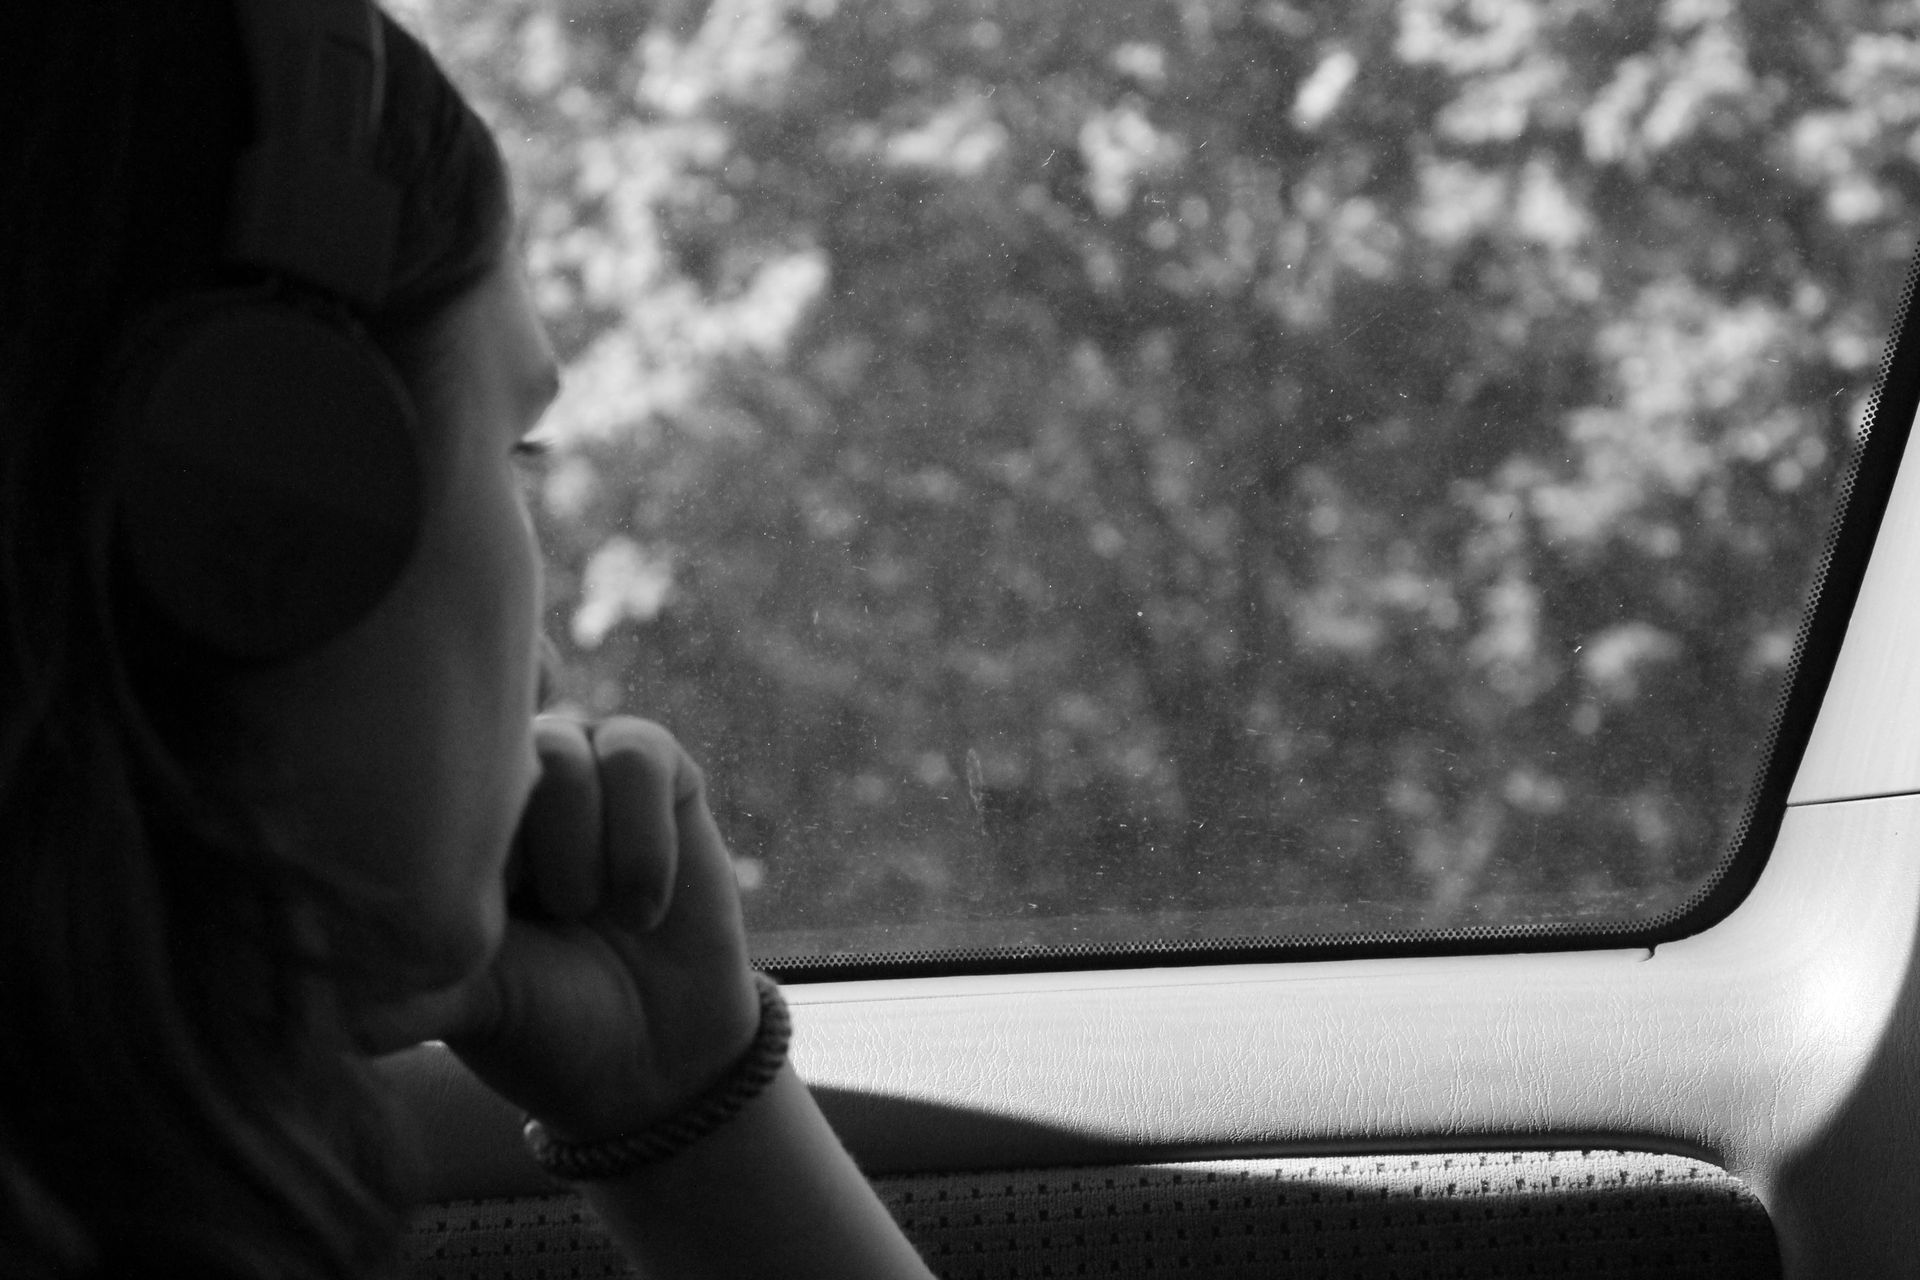 a woman contemplates her abortion and wonders if her experience is normal during her car ride